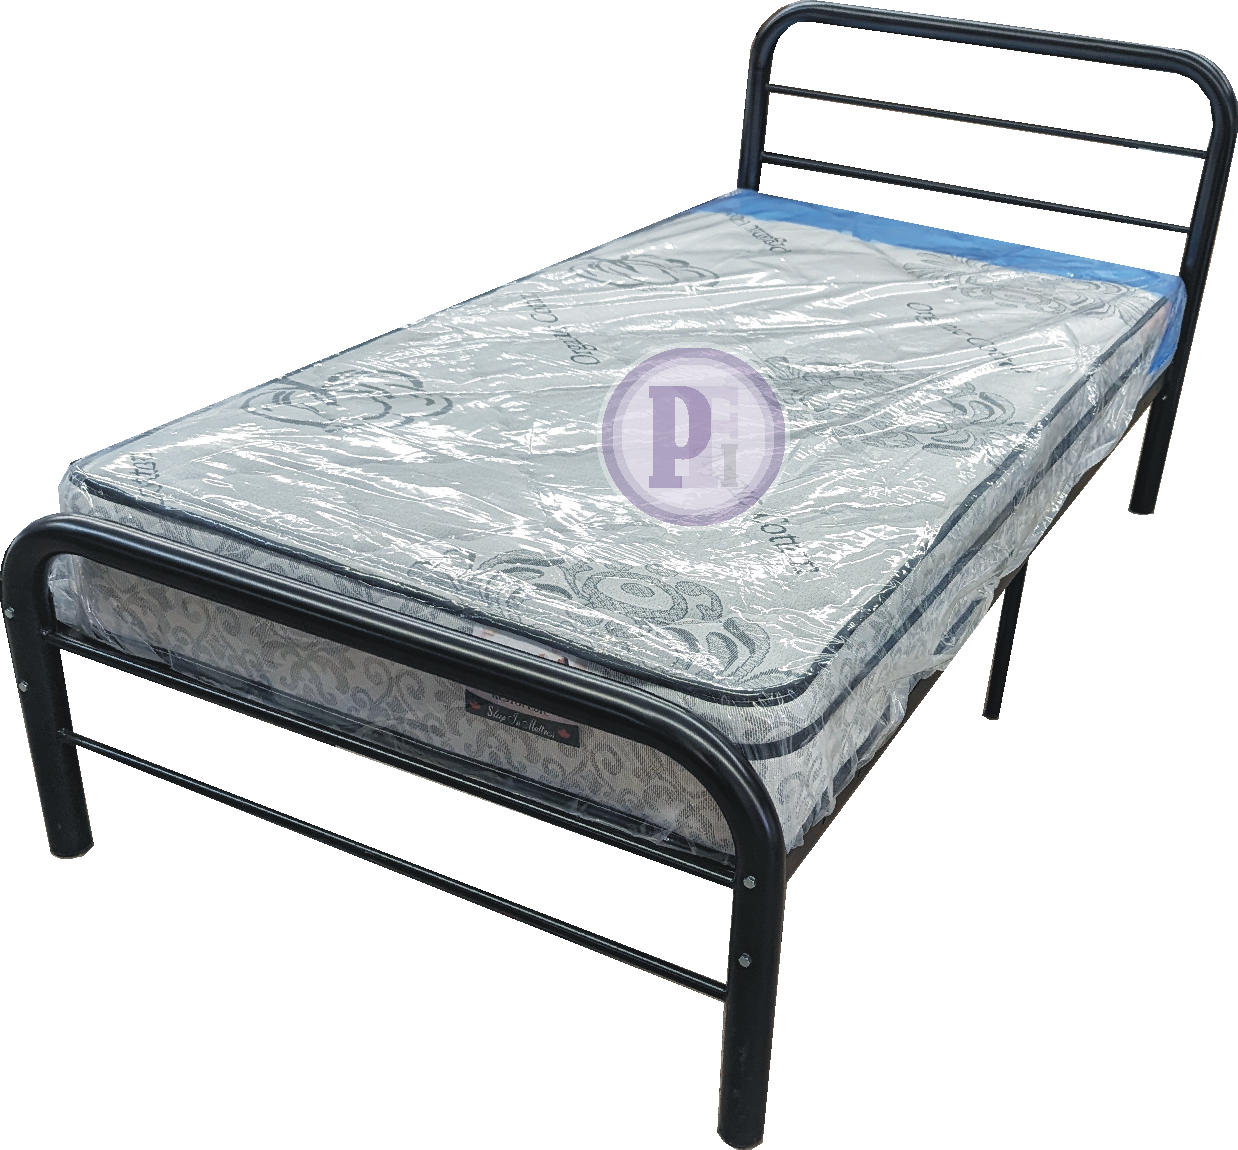 Platform Bed - EXTREMELY DURABLE, Black Metal  PF-465